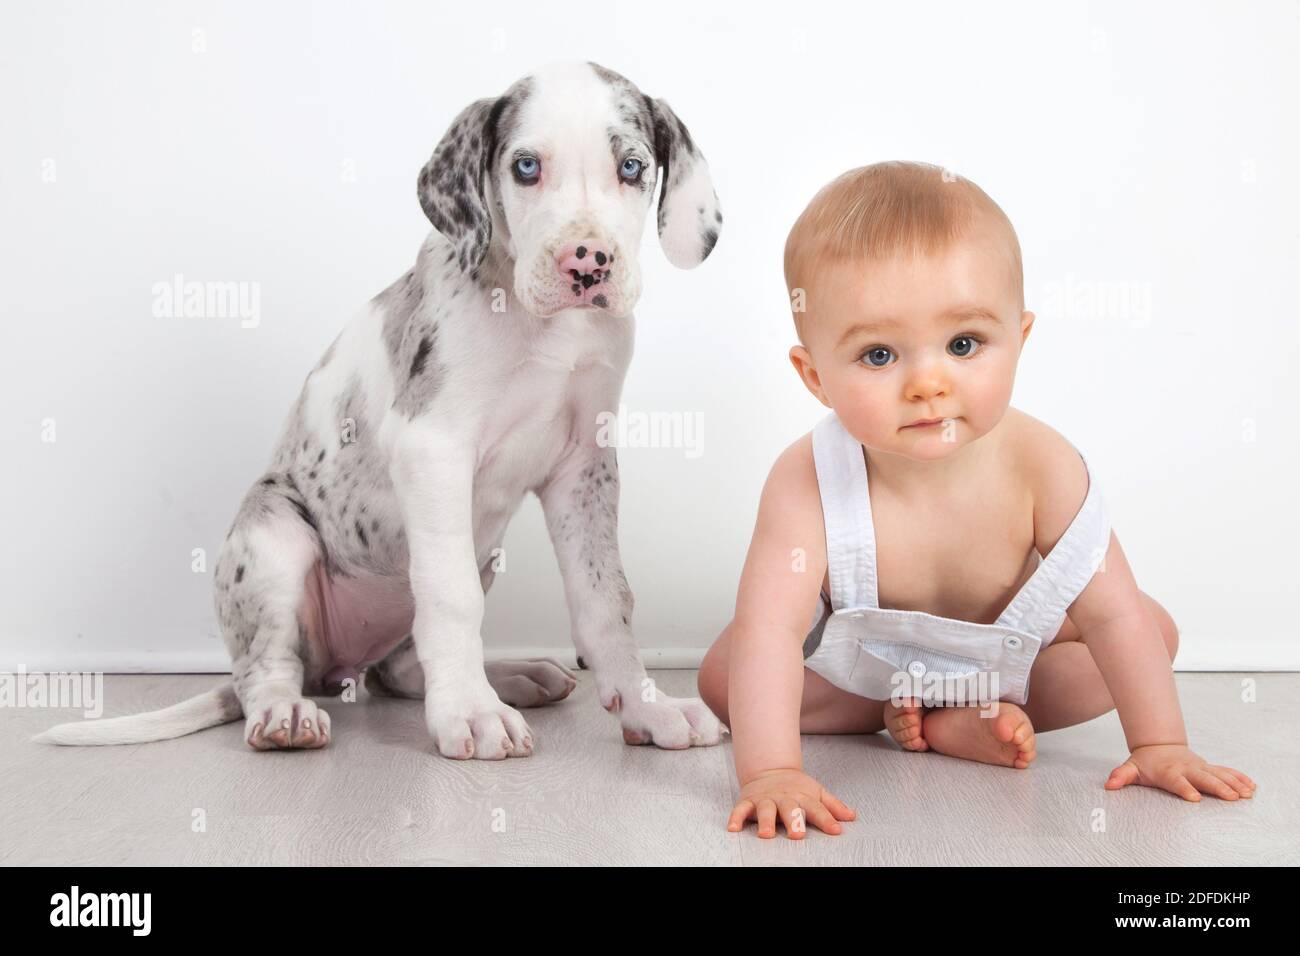 BABY BOY AND HIS GREAT DANE, CHILD AND PET, STUDIO PORTRAIT Stock Photo -  Alamy